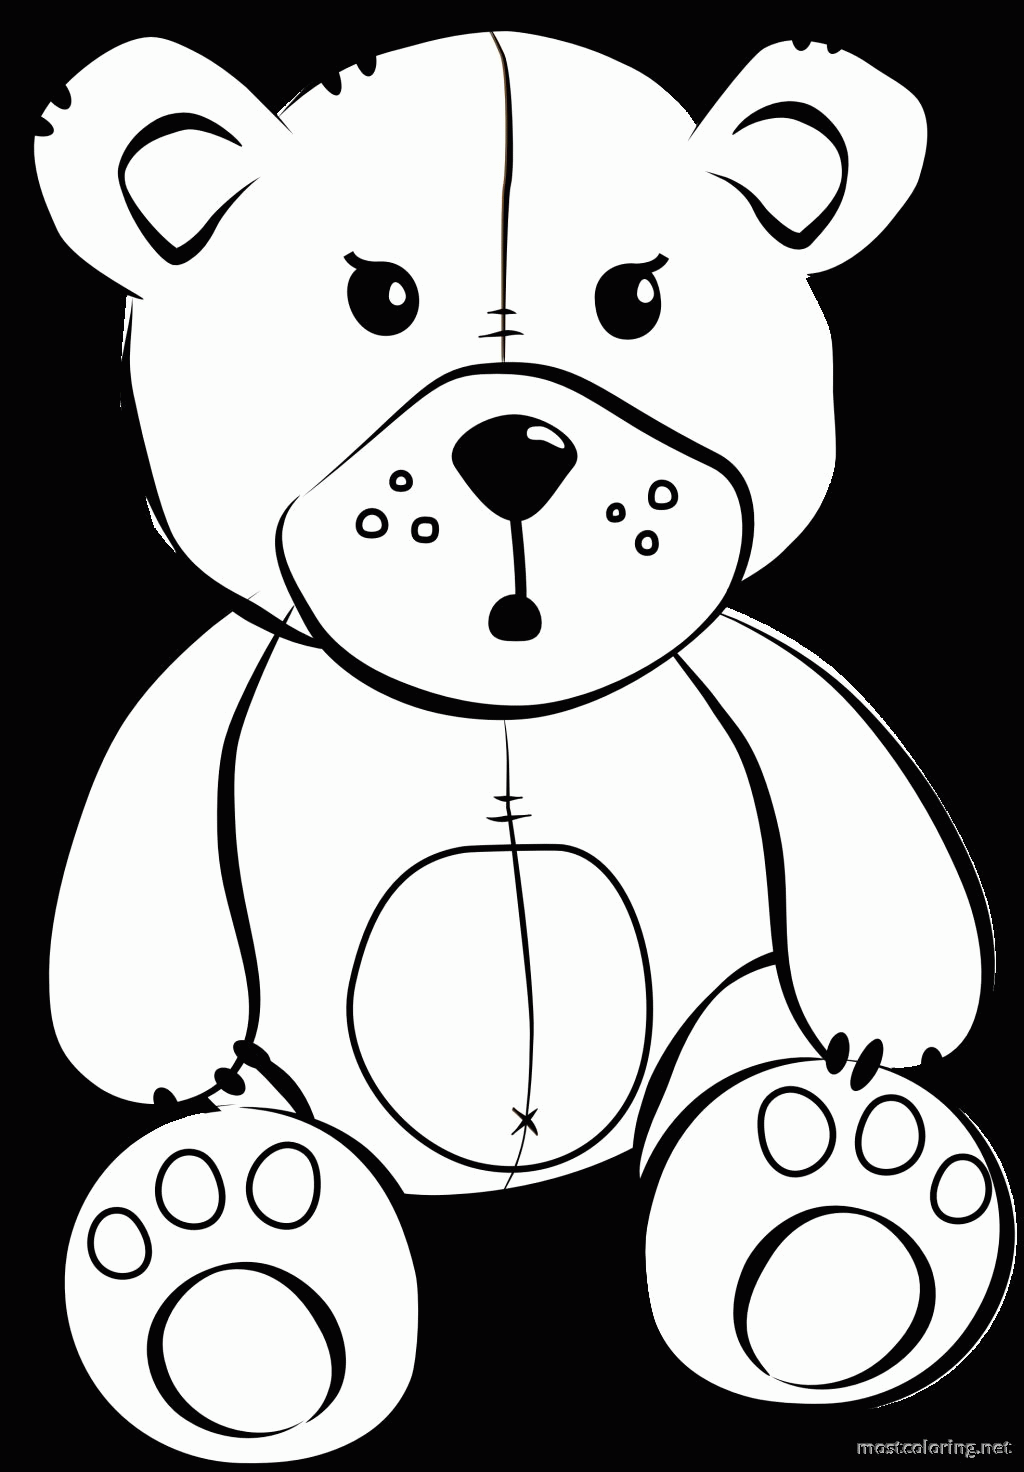 Stuffed animal coloring pages